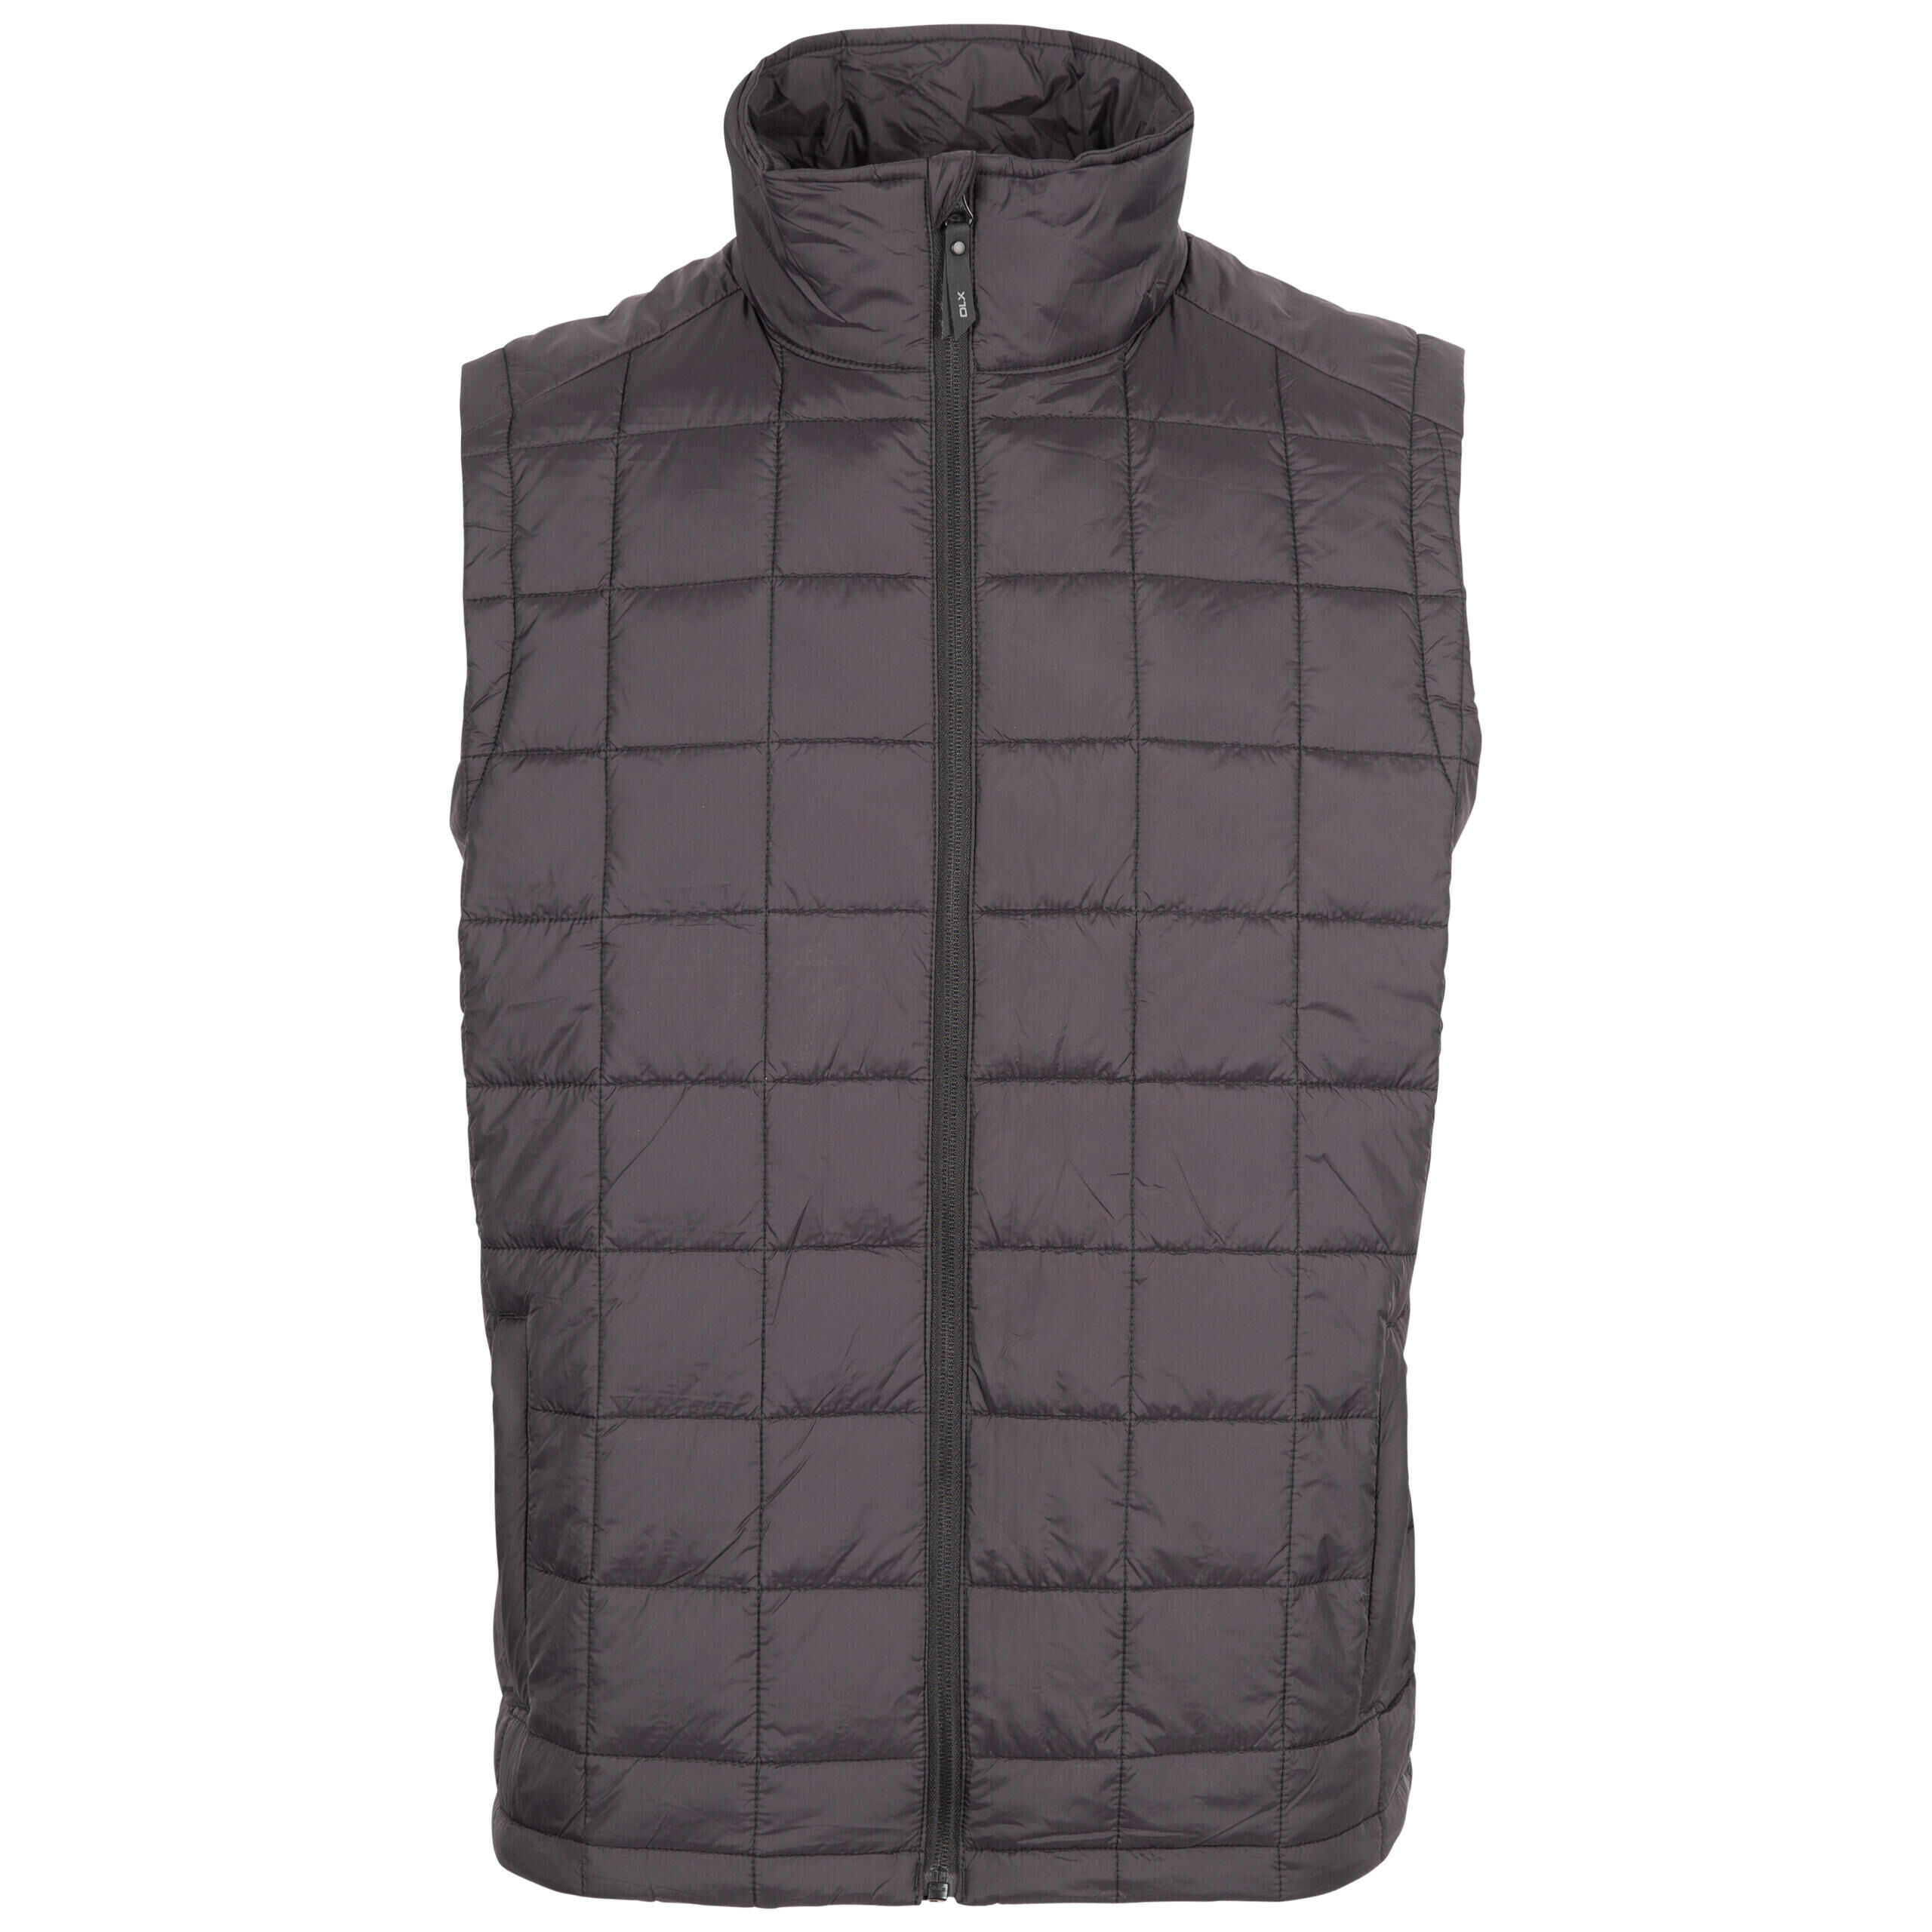 DLX Mens Padded Gilet Bodywarmer with 2 Zip Pockets Enoless